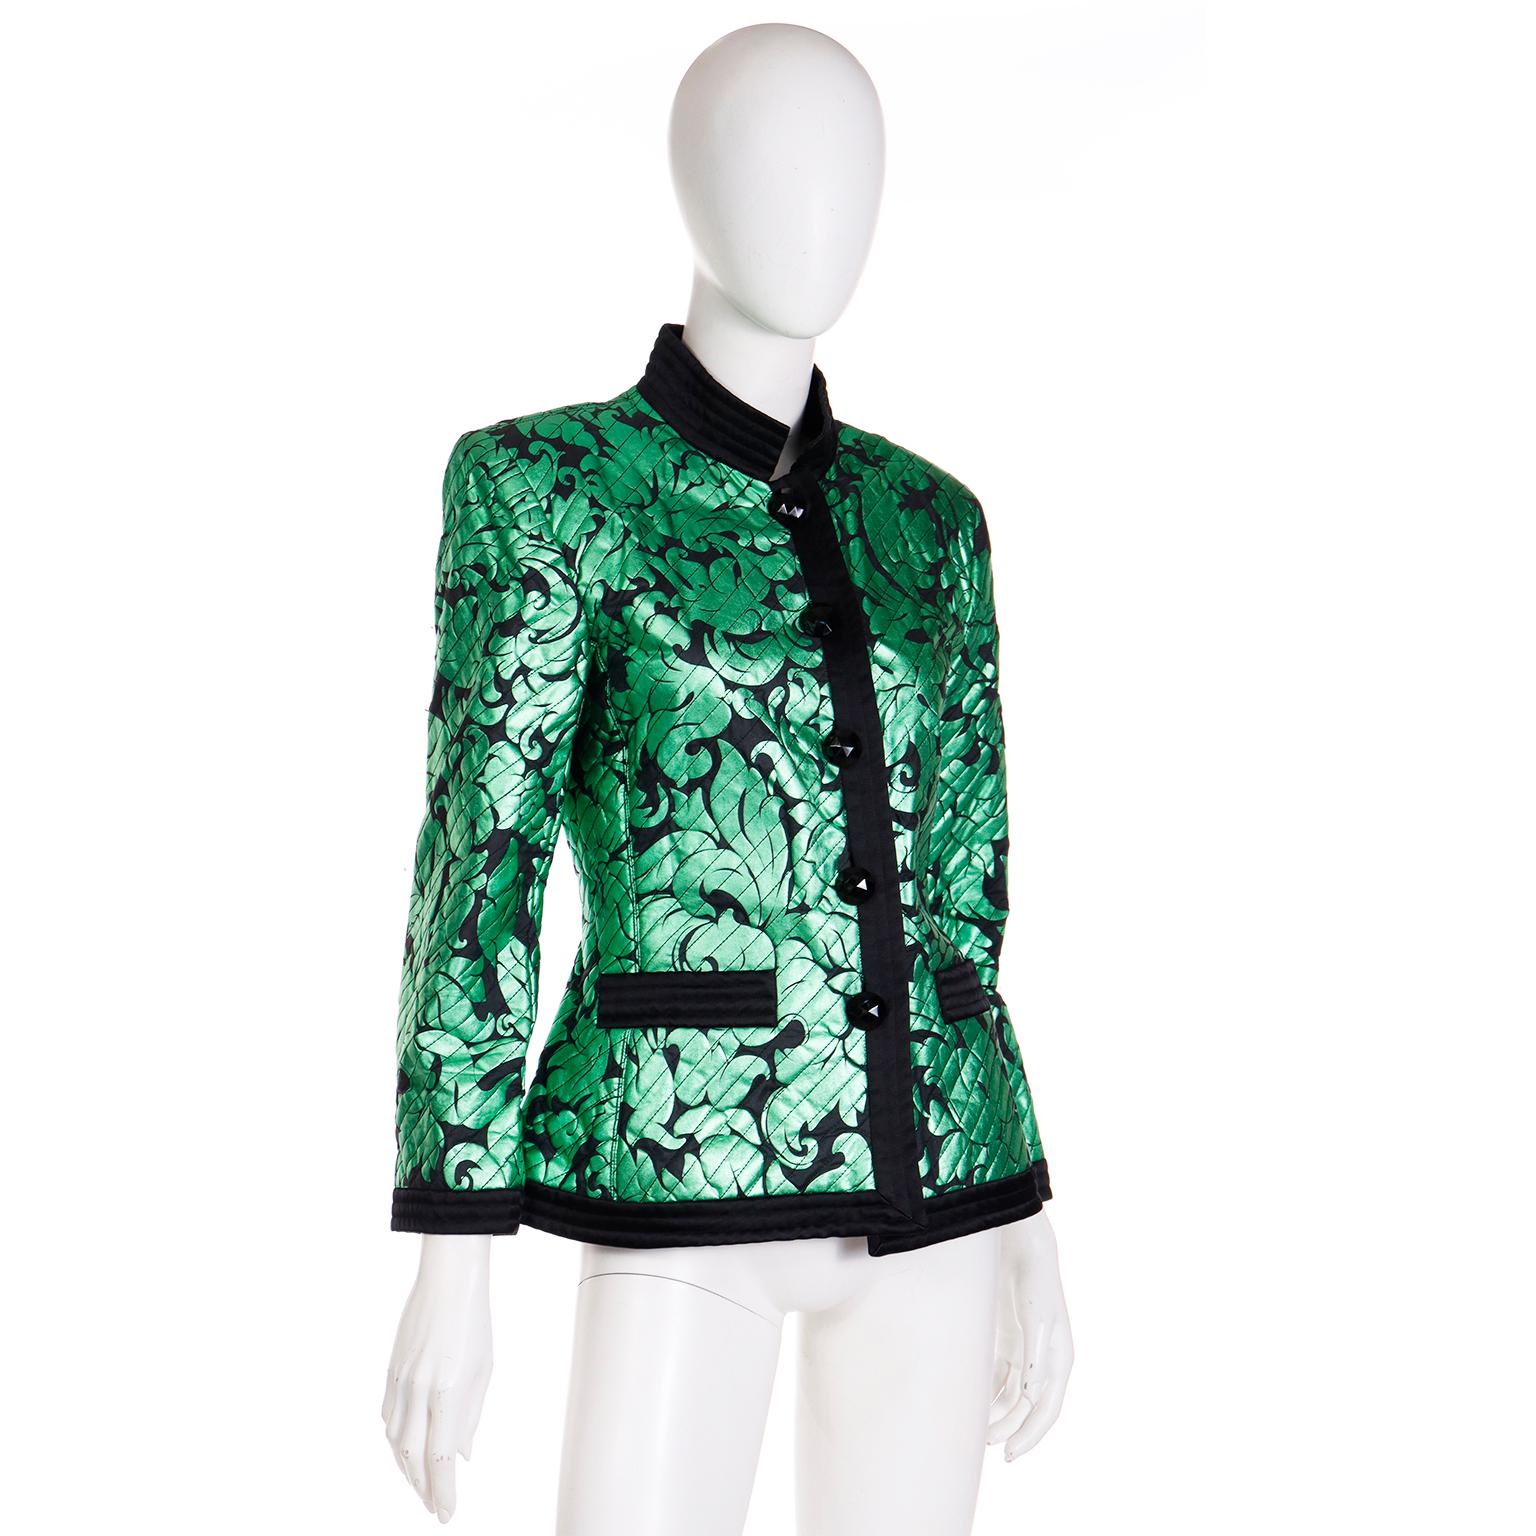 Women's Yves Saint Laurent F/W 1986 / 87 Green Lame Jacket with Quilted Black Satin Trim